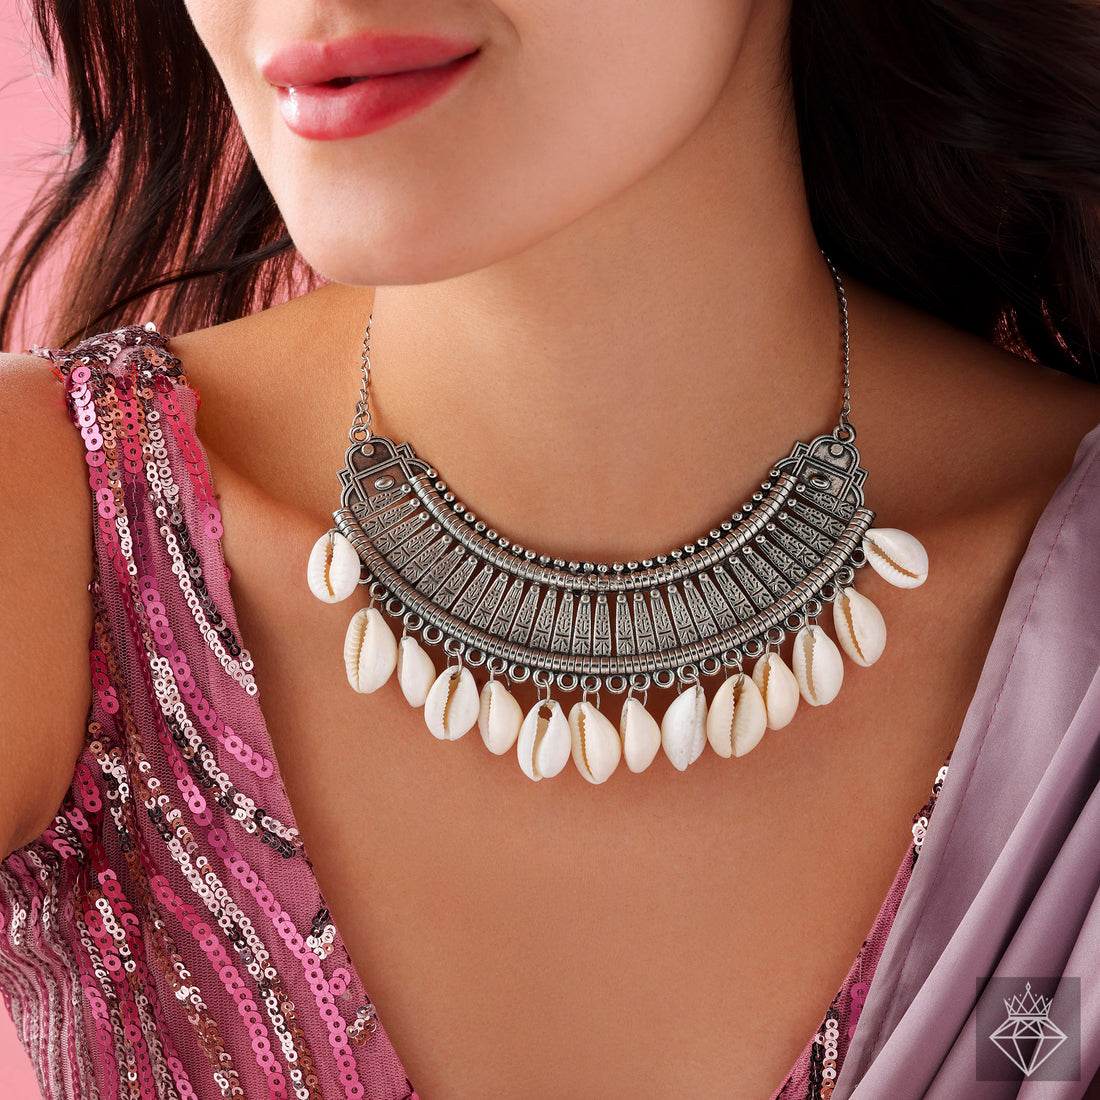 Coastal Chic: PRAO Shell Hangings Statement Necklace